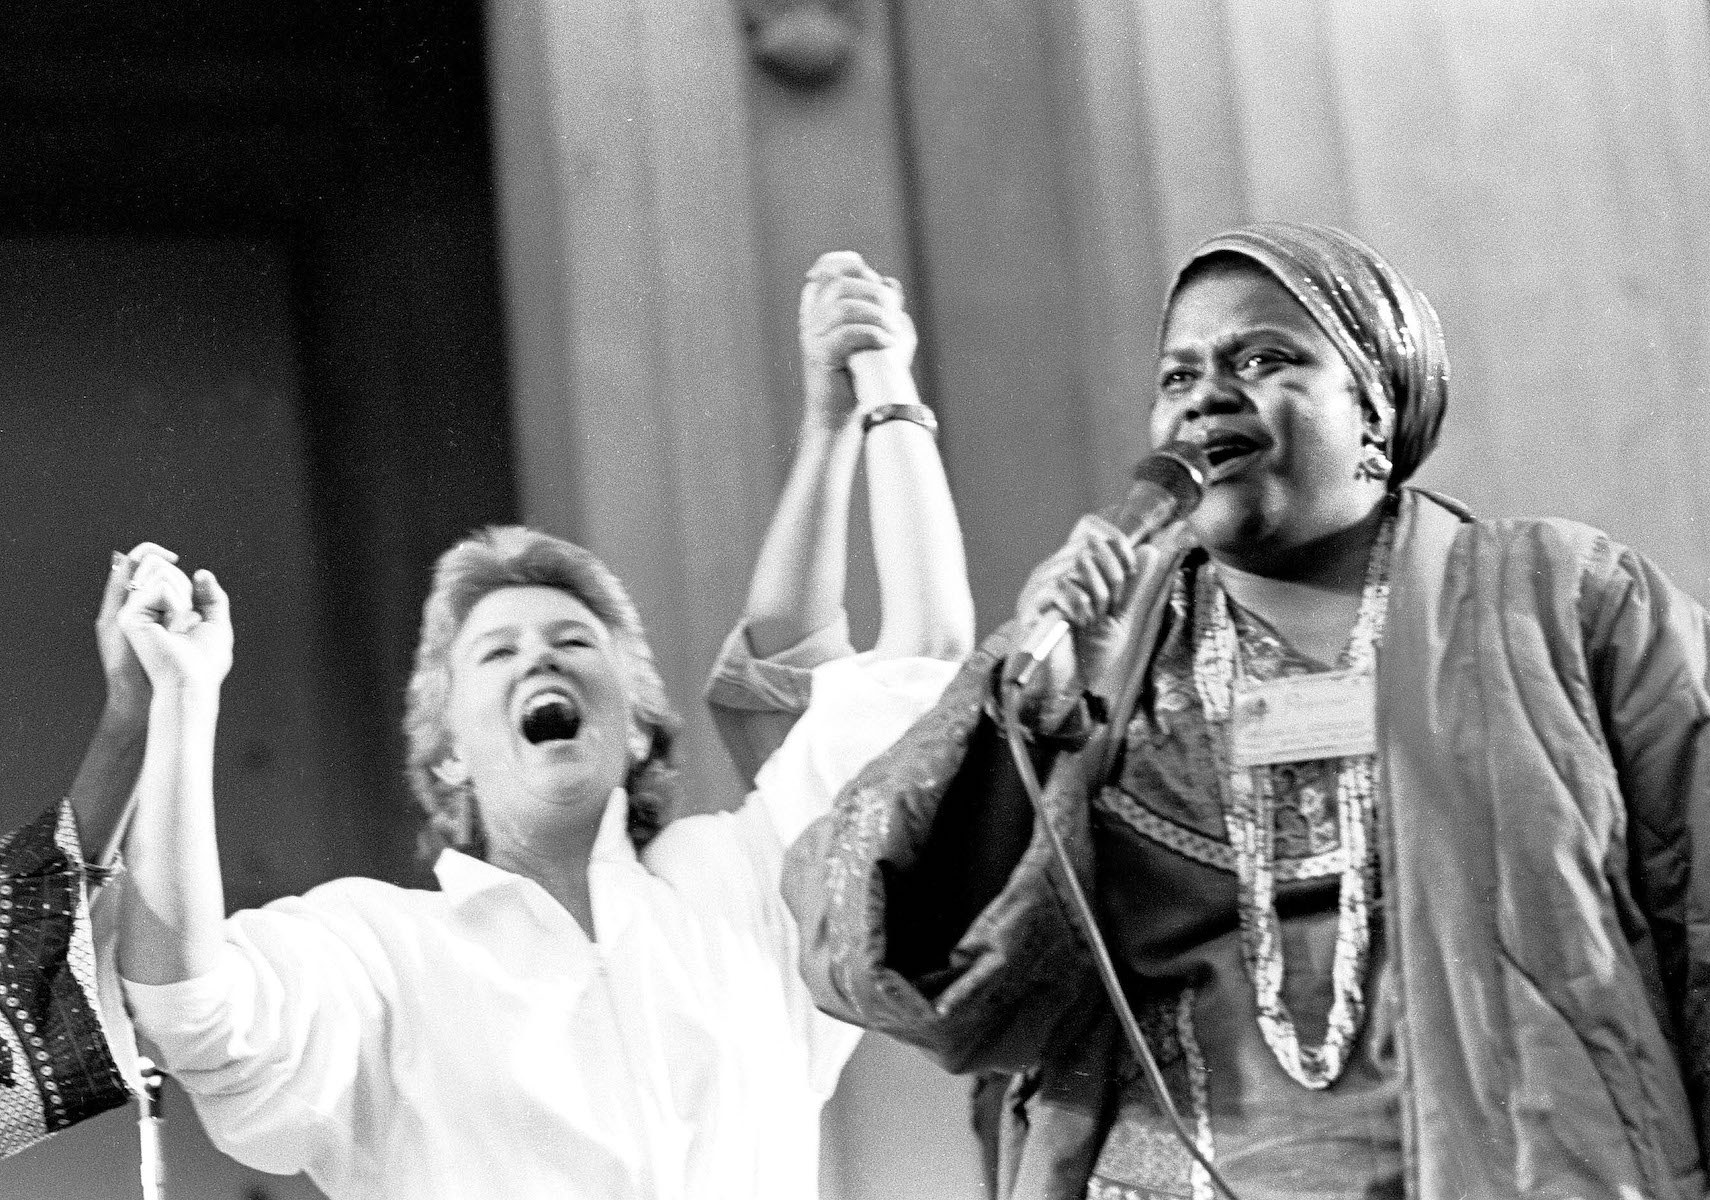 Holly Near and Bernice Johnson Reagon performing at the Redwood Music Festival at Greek Theatre, Berkeley, CA, 1985. Photo Credit: J.A. Rubino. Photo courtesy of Holly Near.